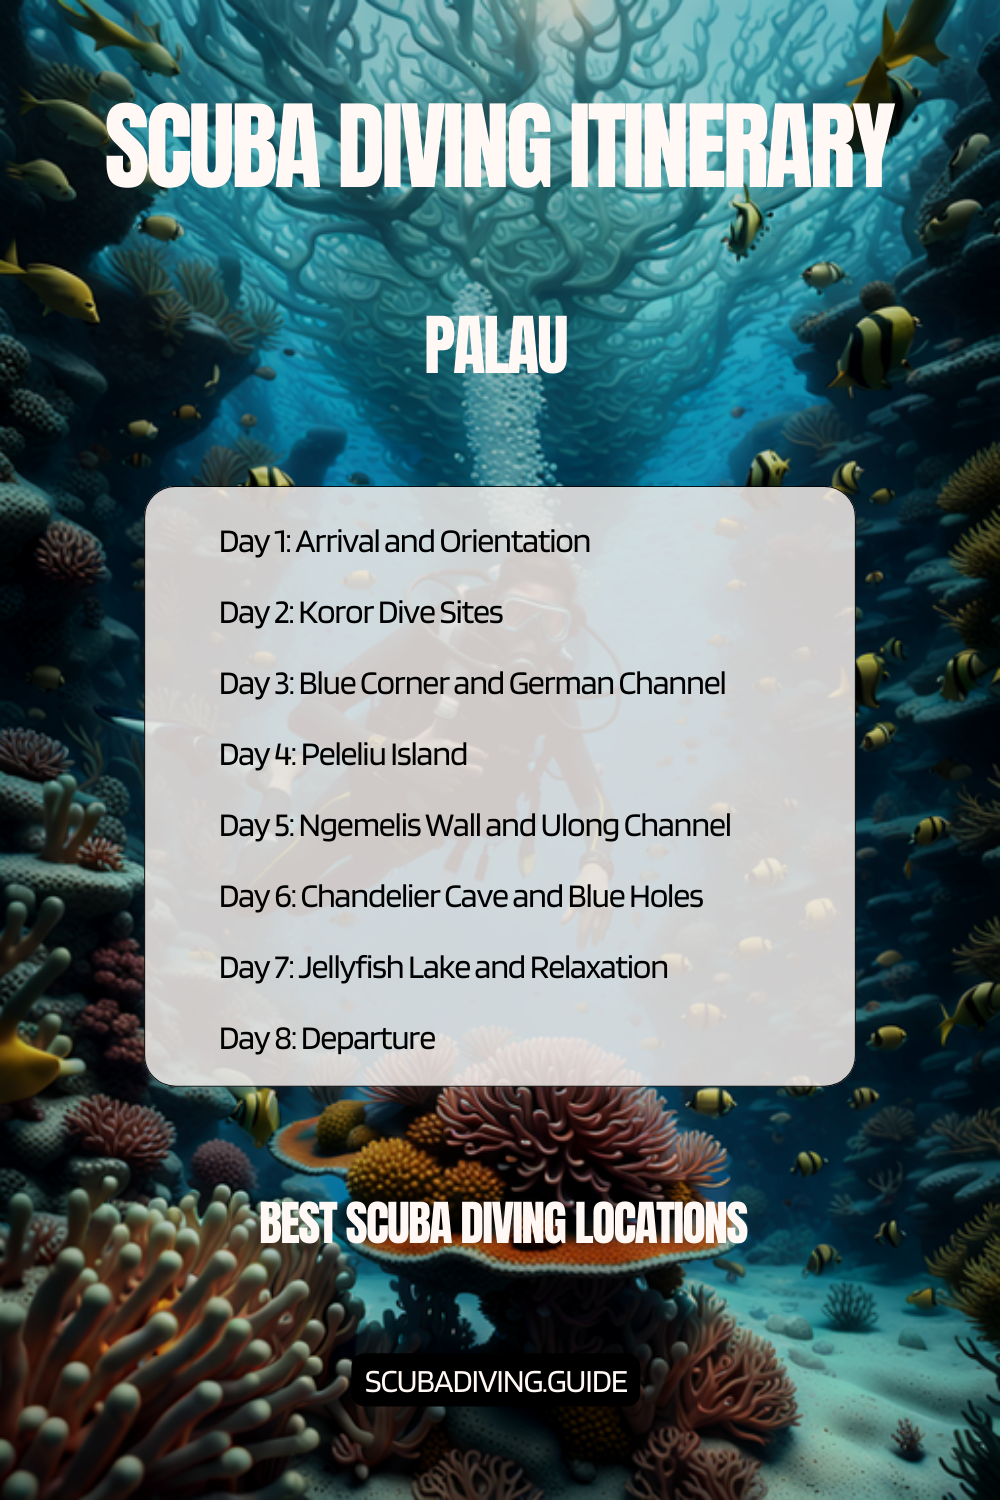 Palau Recommended Scuba Diving Itinerary